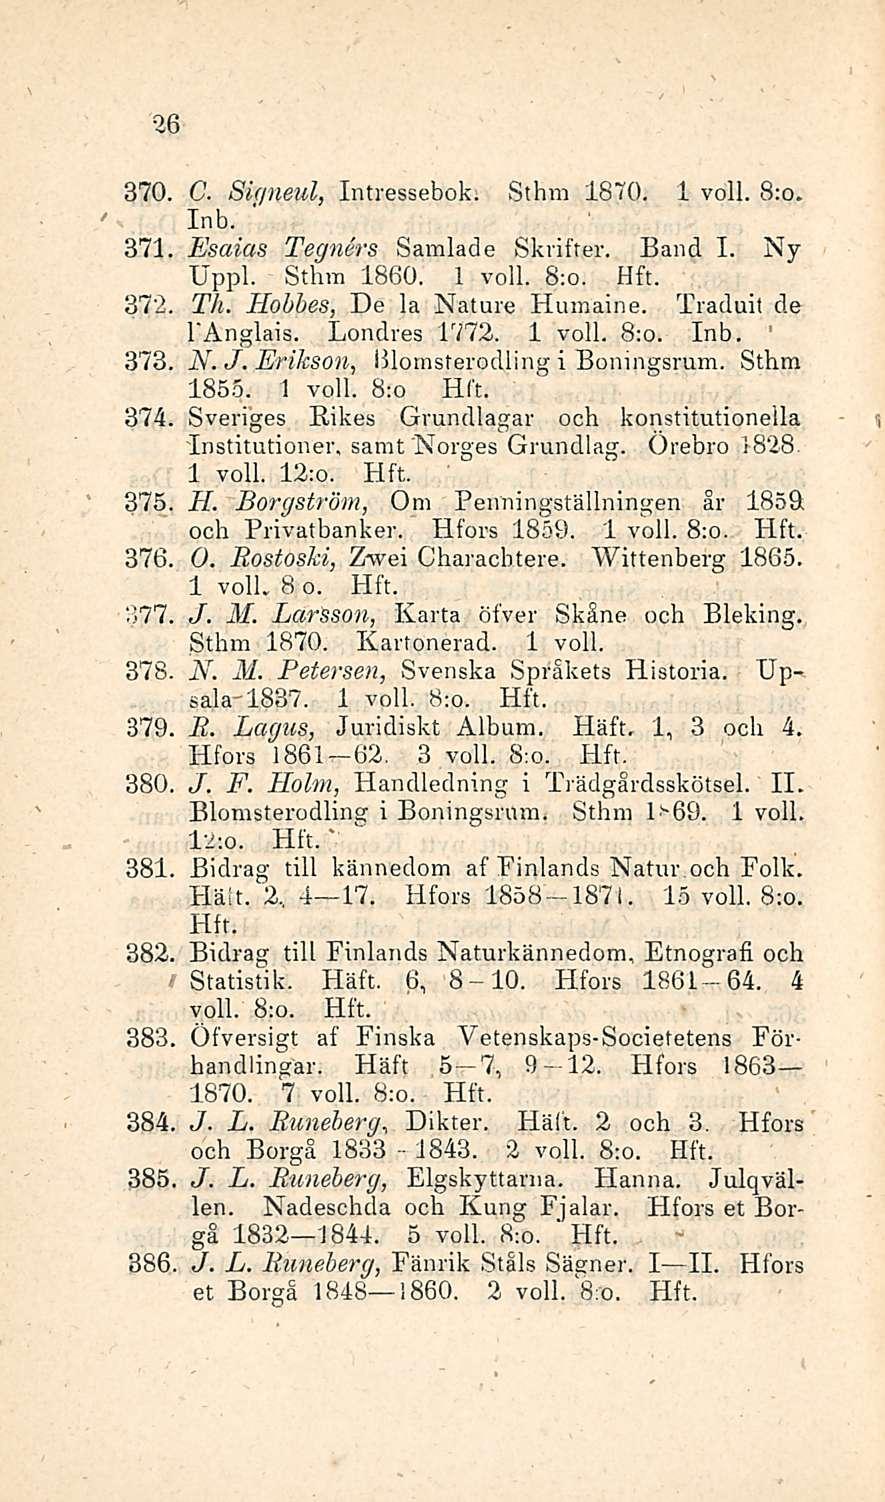 1843. 26 370. C. Siqneul, Intressebok. Sthm 1870. 1 voll. 8:o. Inb. ' 371. Esaias Tegners Samlade Skvifter. Band I. Ny Uppl. Sthm 1860. 1 voll. 8:o. 372. Th. Hobhes, De la Nature Humaine.